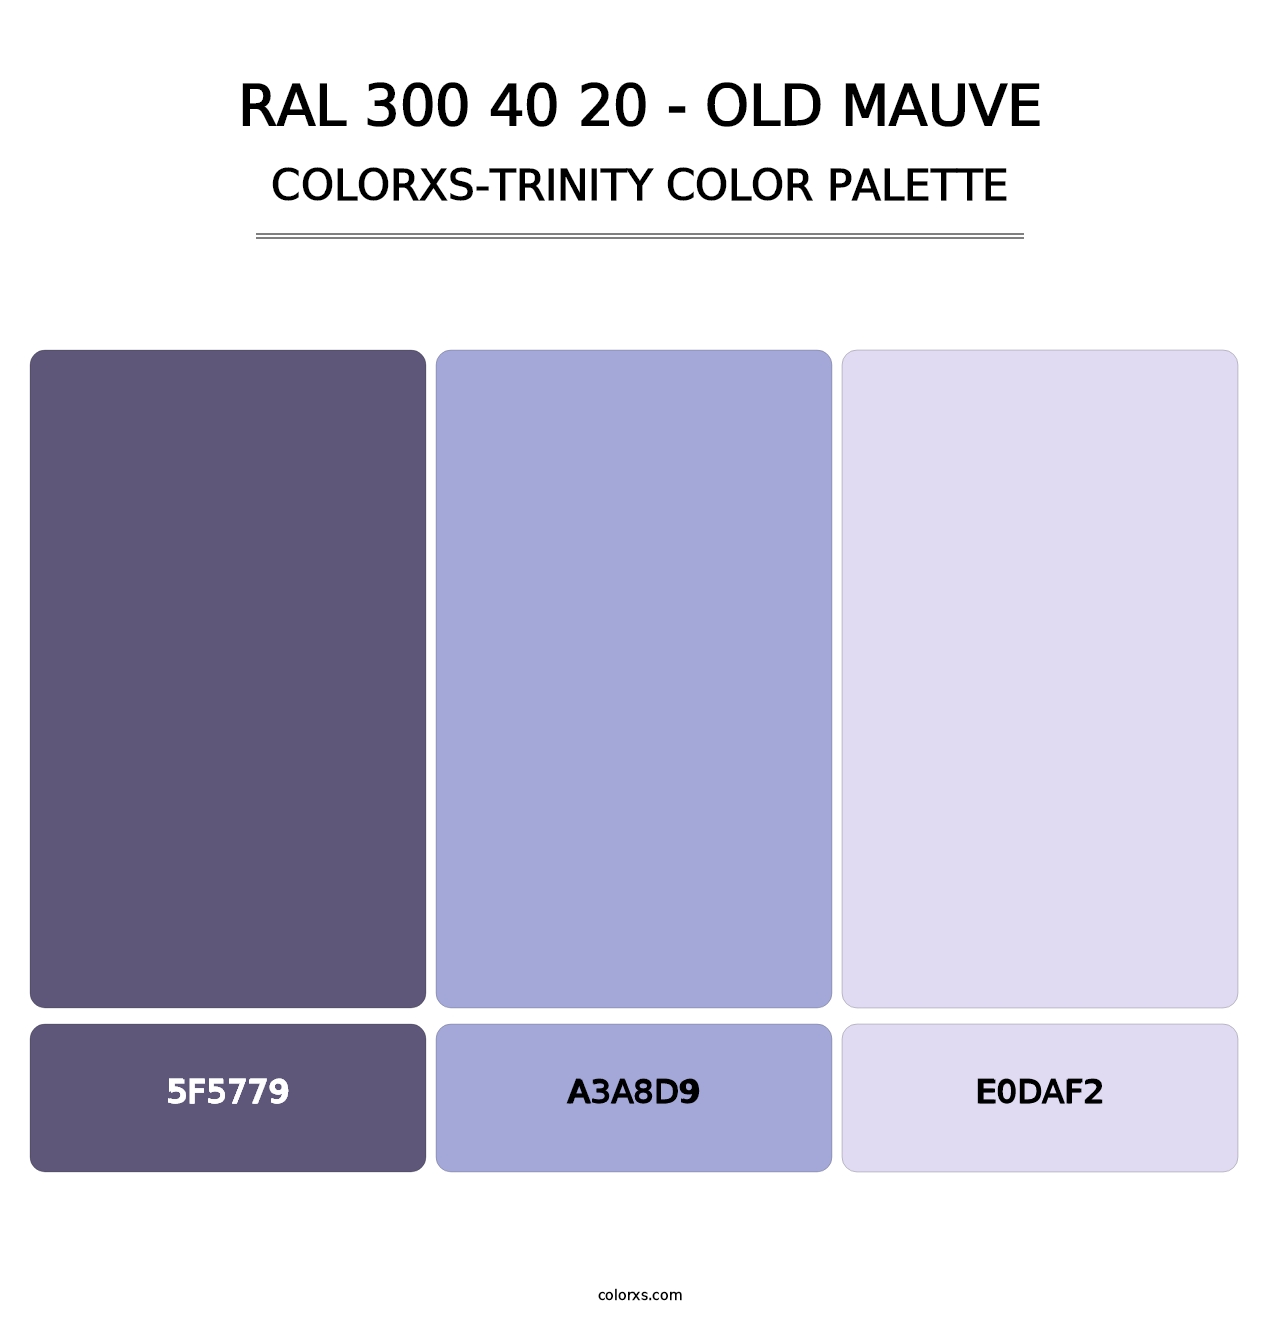 RAL 300 40 20 - Old Mauve - Colorxs Trinity Palette